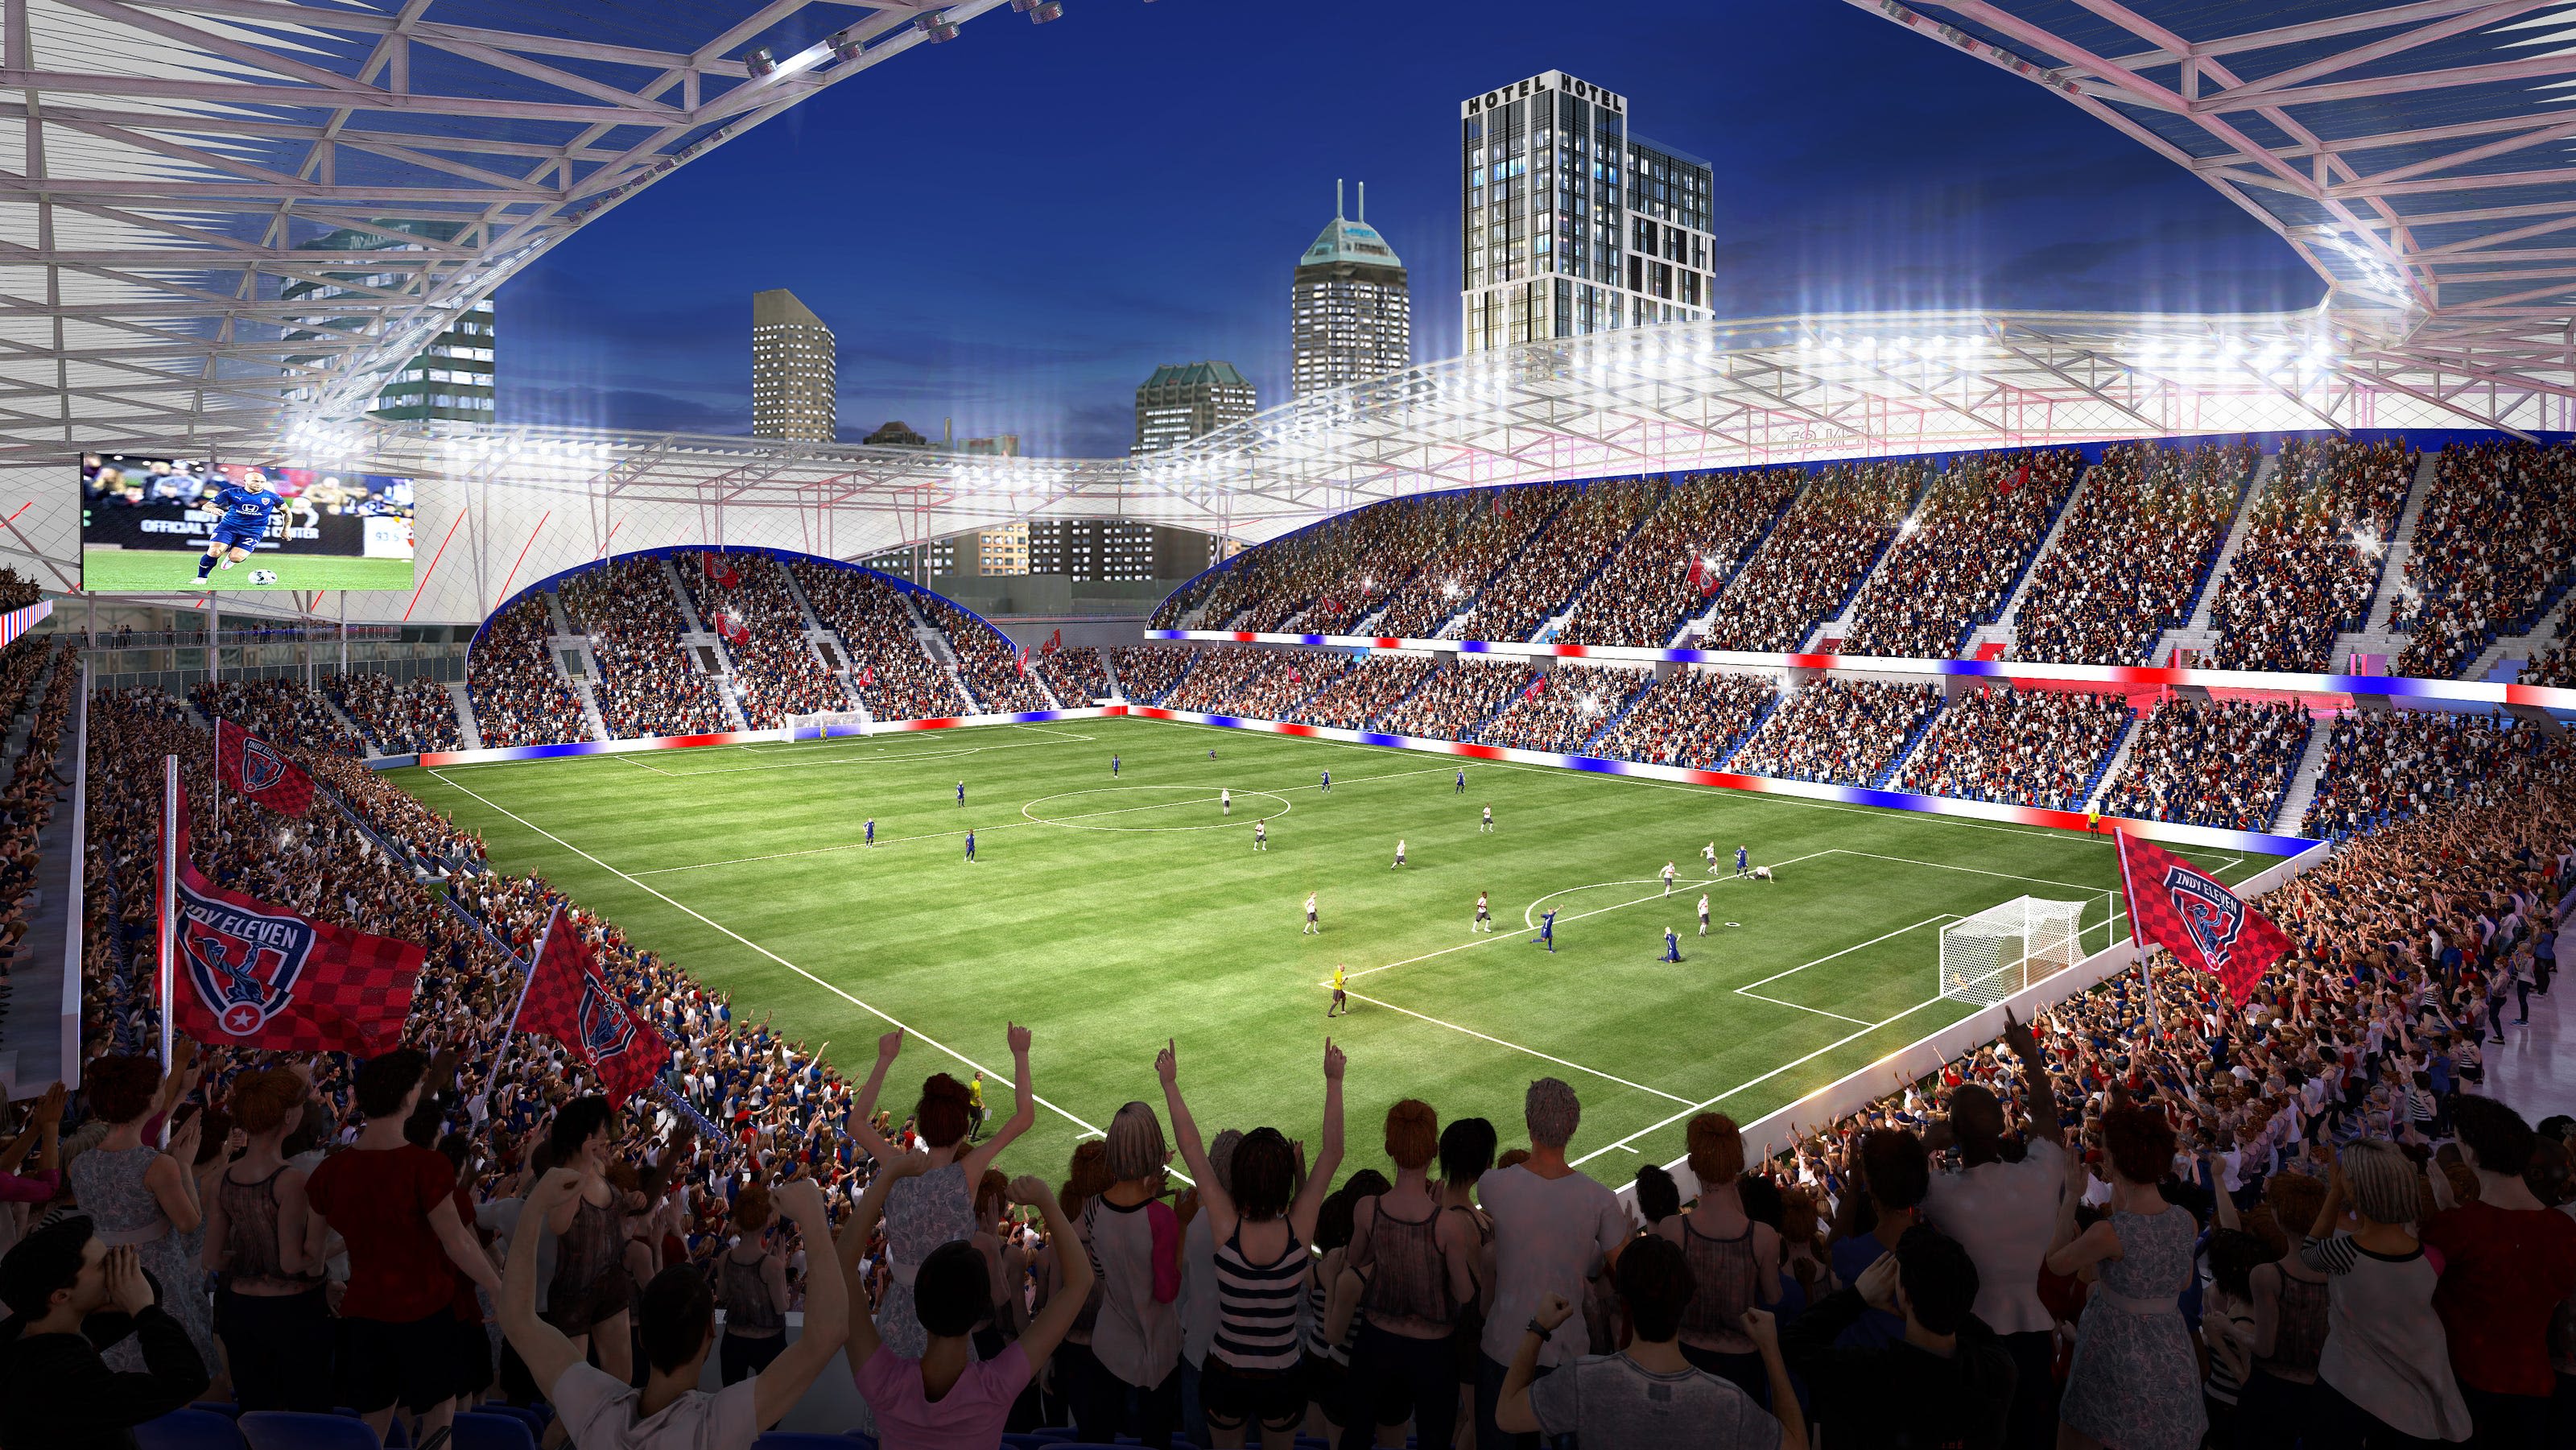 Indianapolis plans to pursue MLS expansion team, raising questions on Indy Eleven future